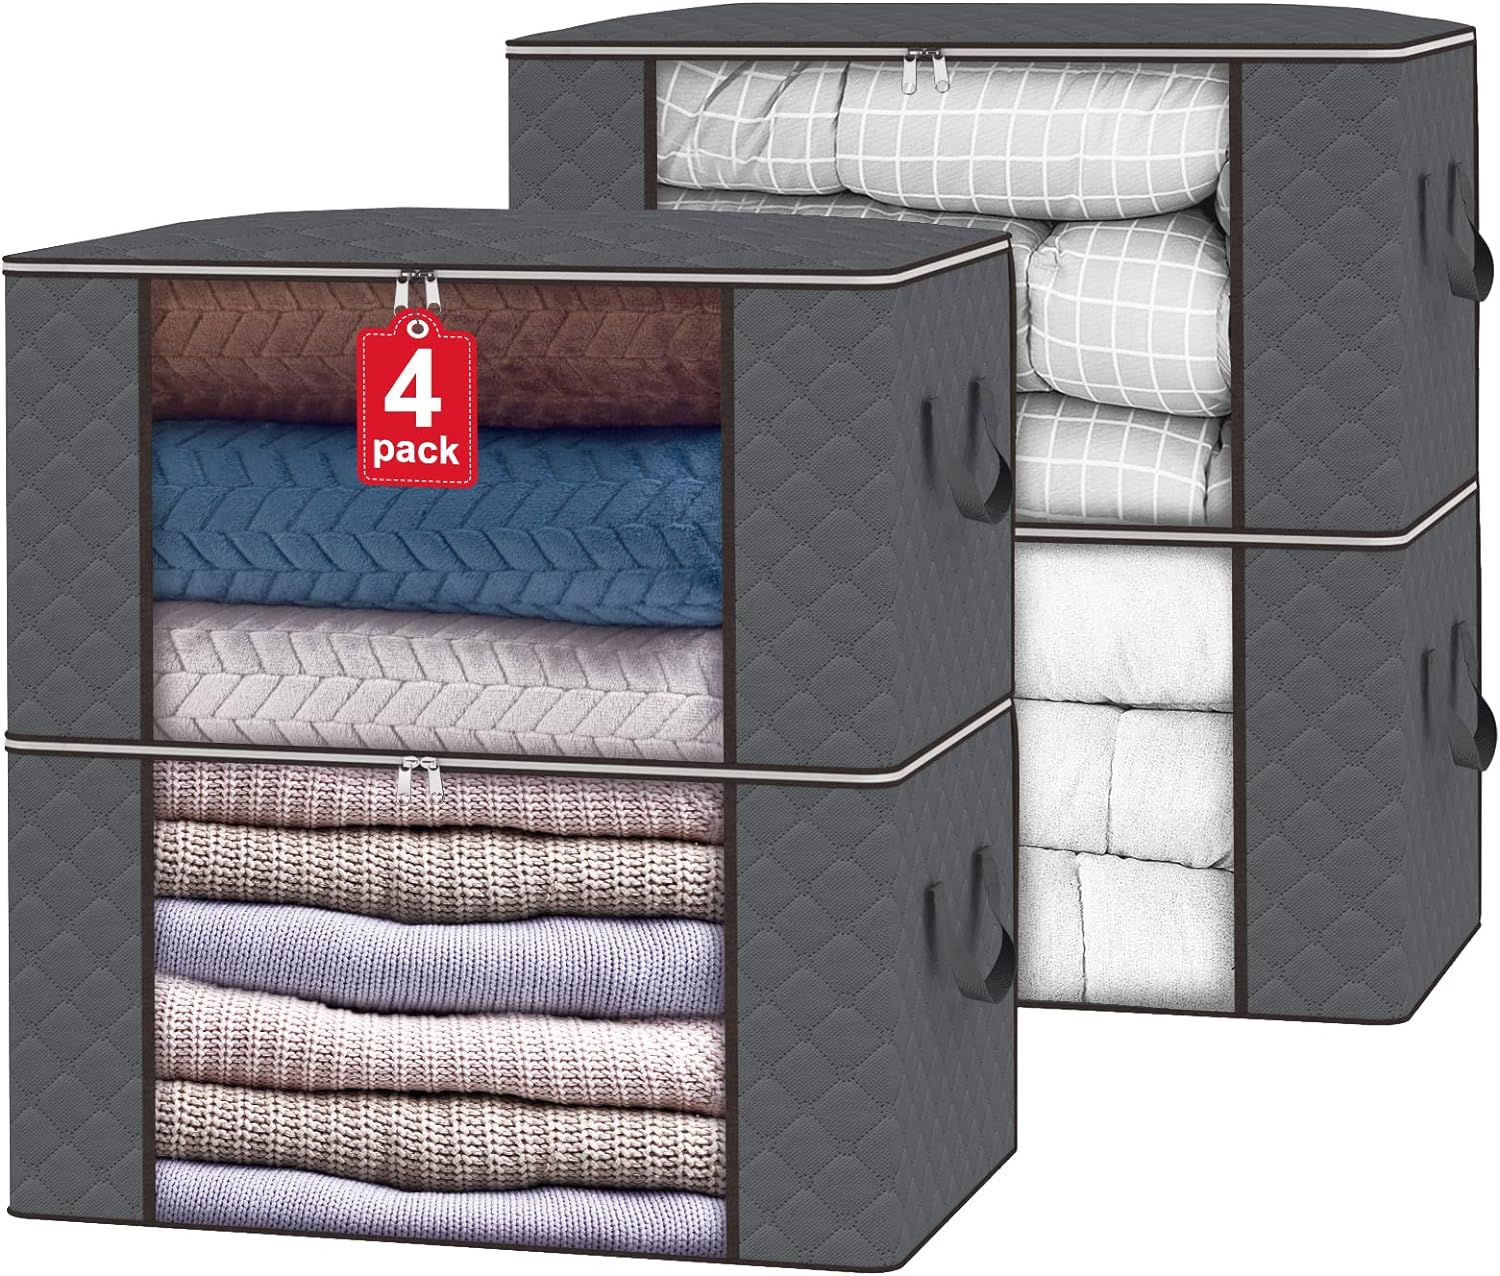 SGHUO 4 Pack Blanket Storage Bags with Zipper, Foldable Comforter Bag, Large Organizers for Blankets, Pillow, Quilts, Linen, Containers Thick Fabric, Sturdy Grey, 90L